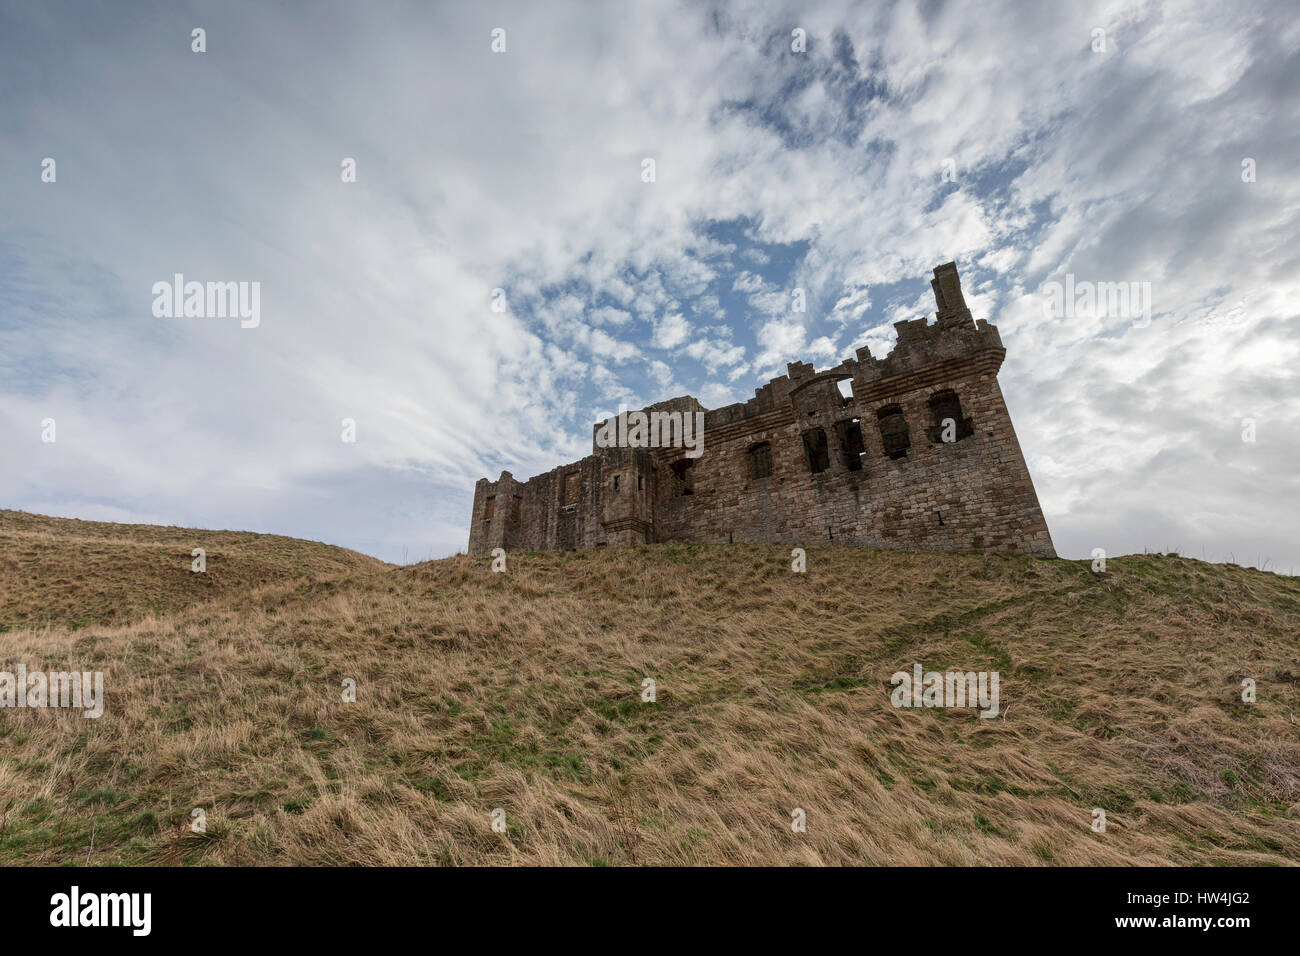 Crichton Castle, near Pathhead, Midlothian. The oldest part of the castle dates from the 15th century, and was later developed by the Crichton family. Stock Photo